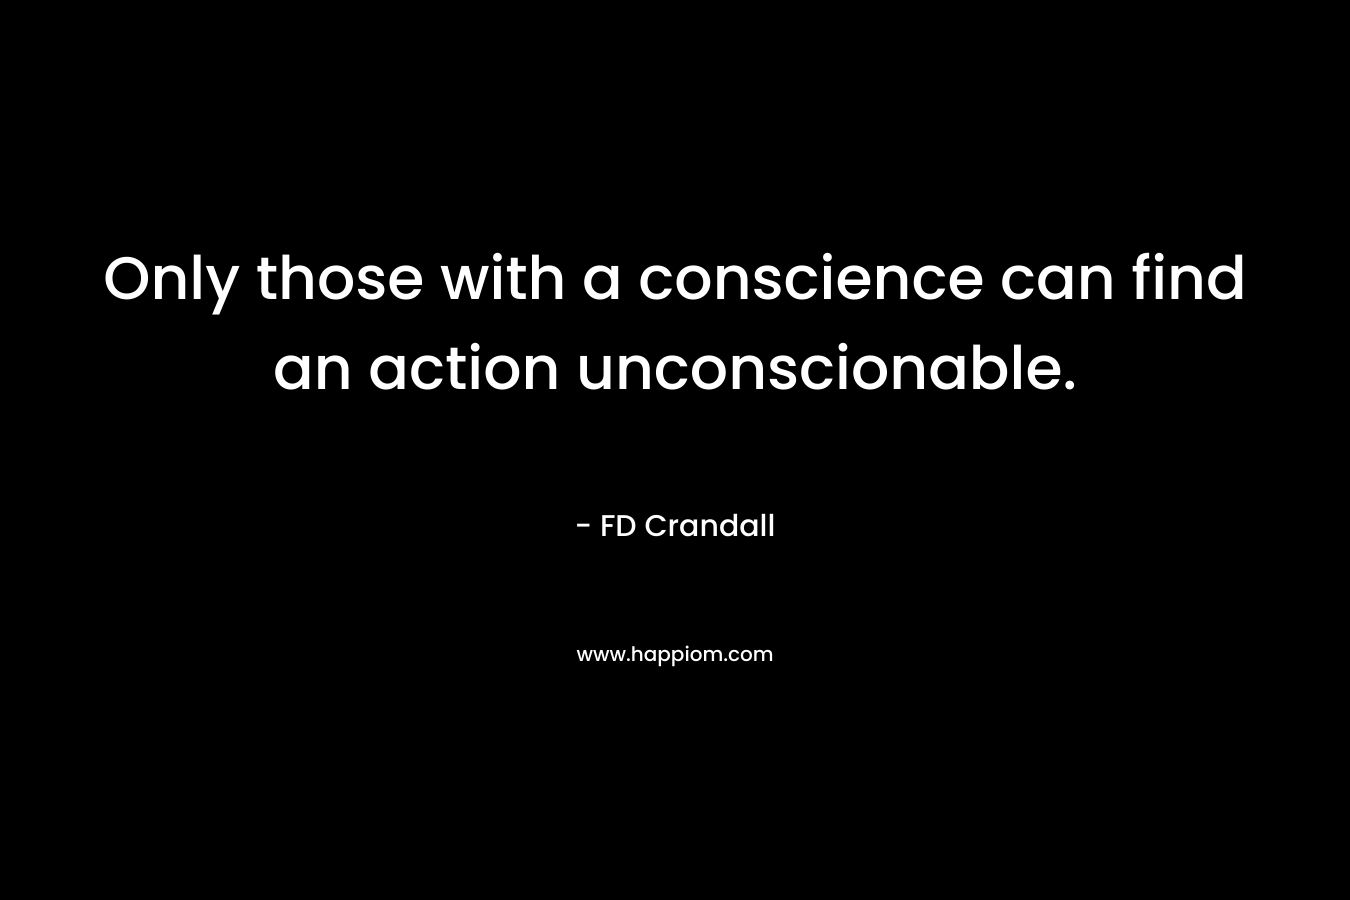 Only those with a conscience can find an action unconscionable. – FD Crandall